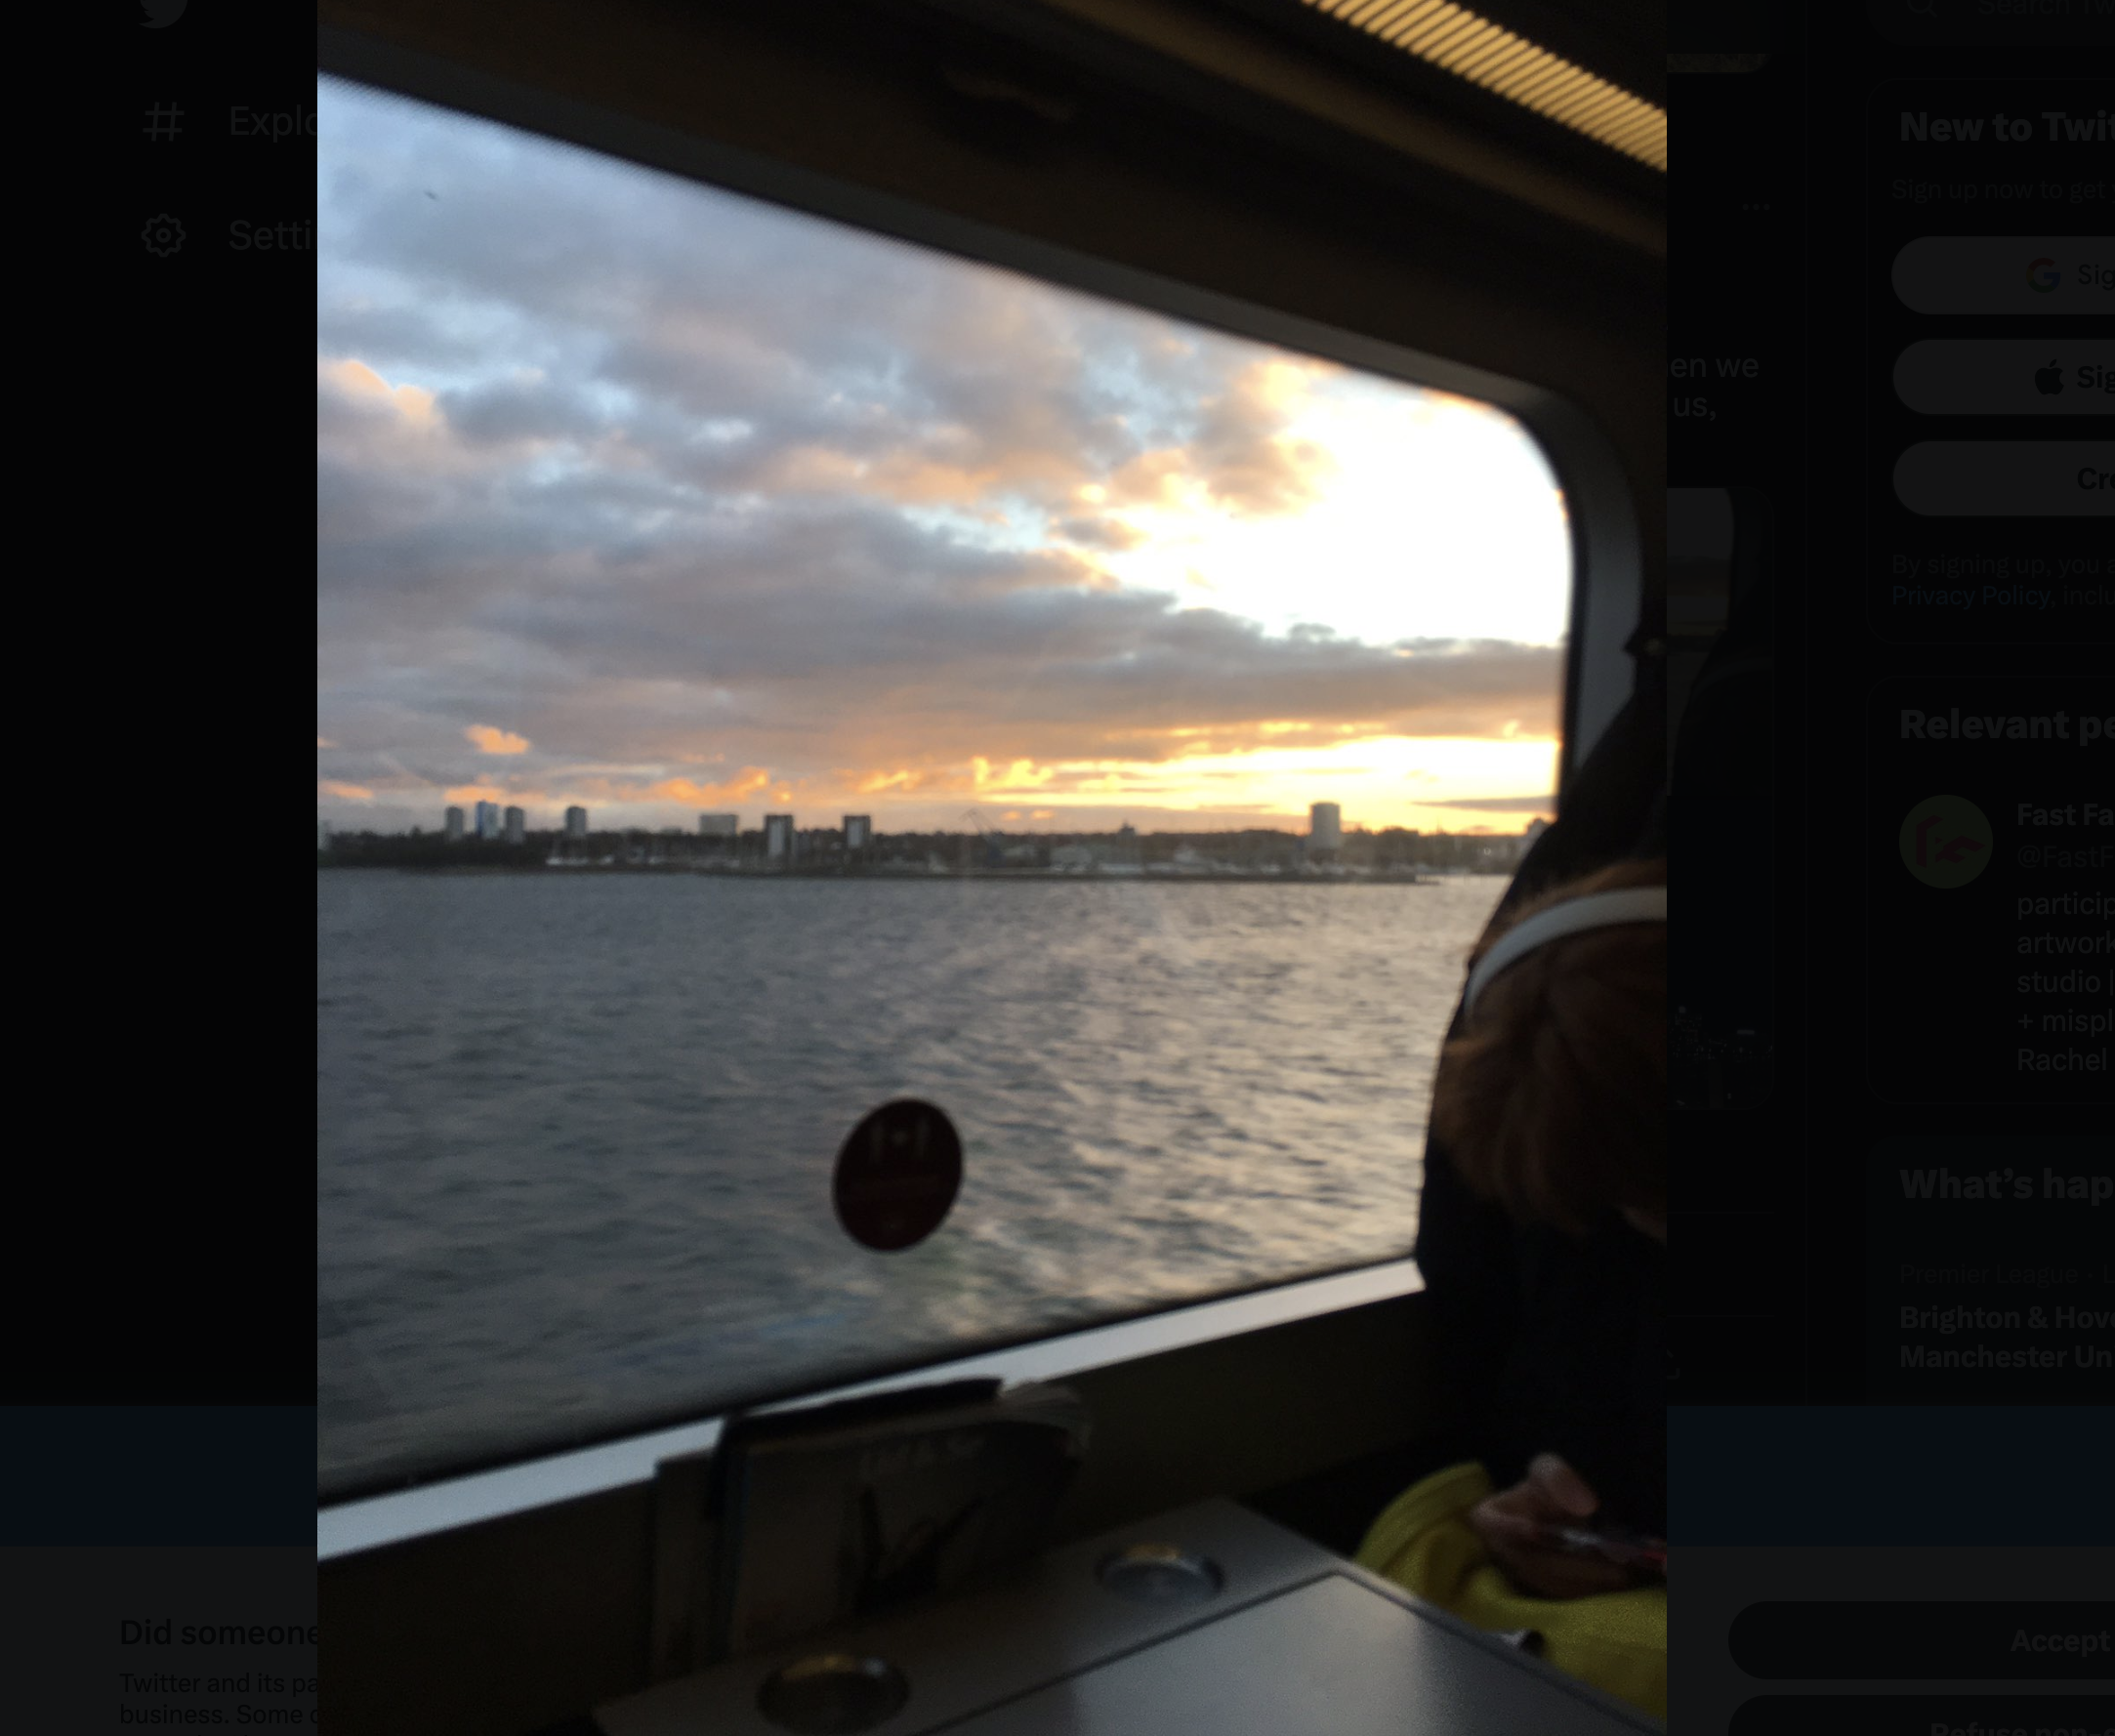 Sunset out of the window of a train, in Denmark. There is a large expanse of water and behind it a city.